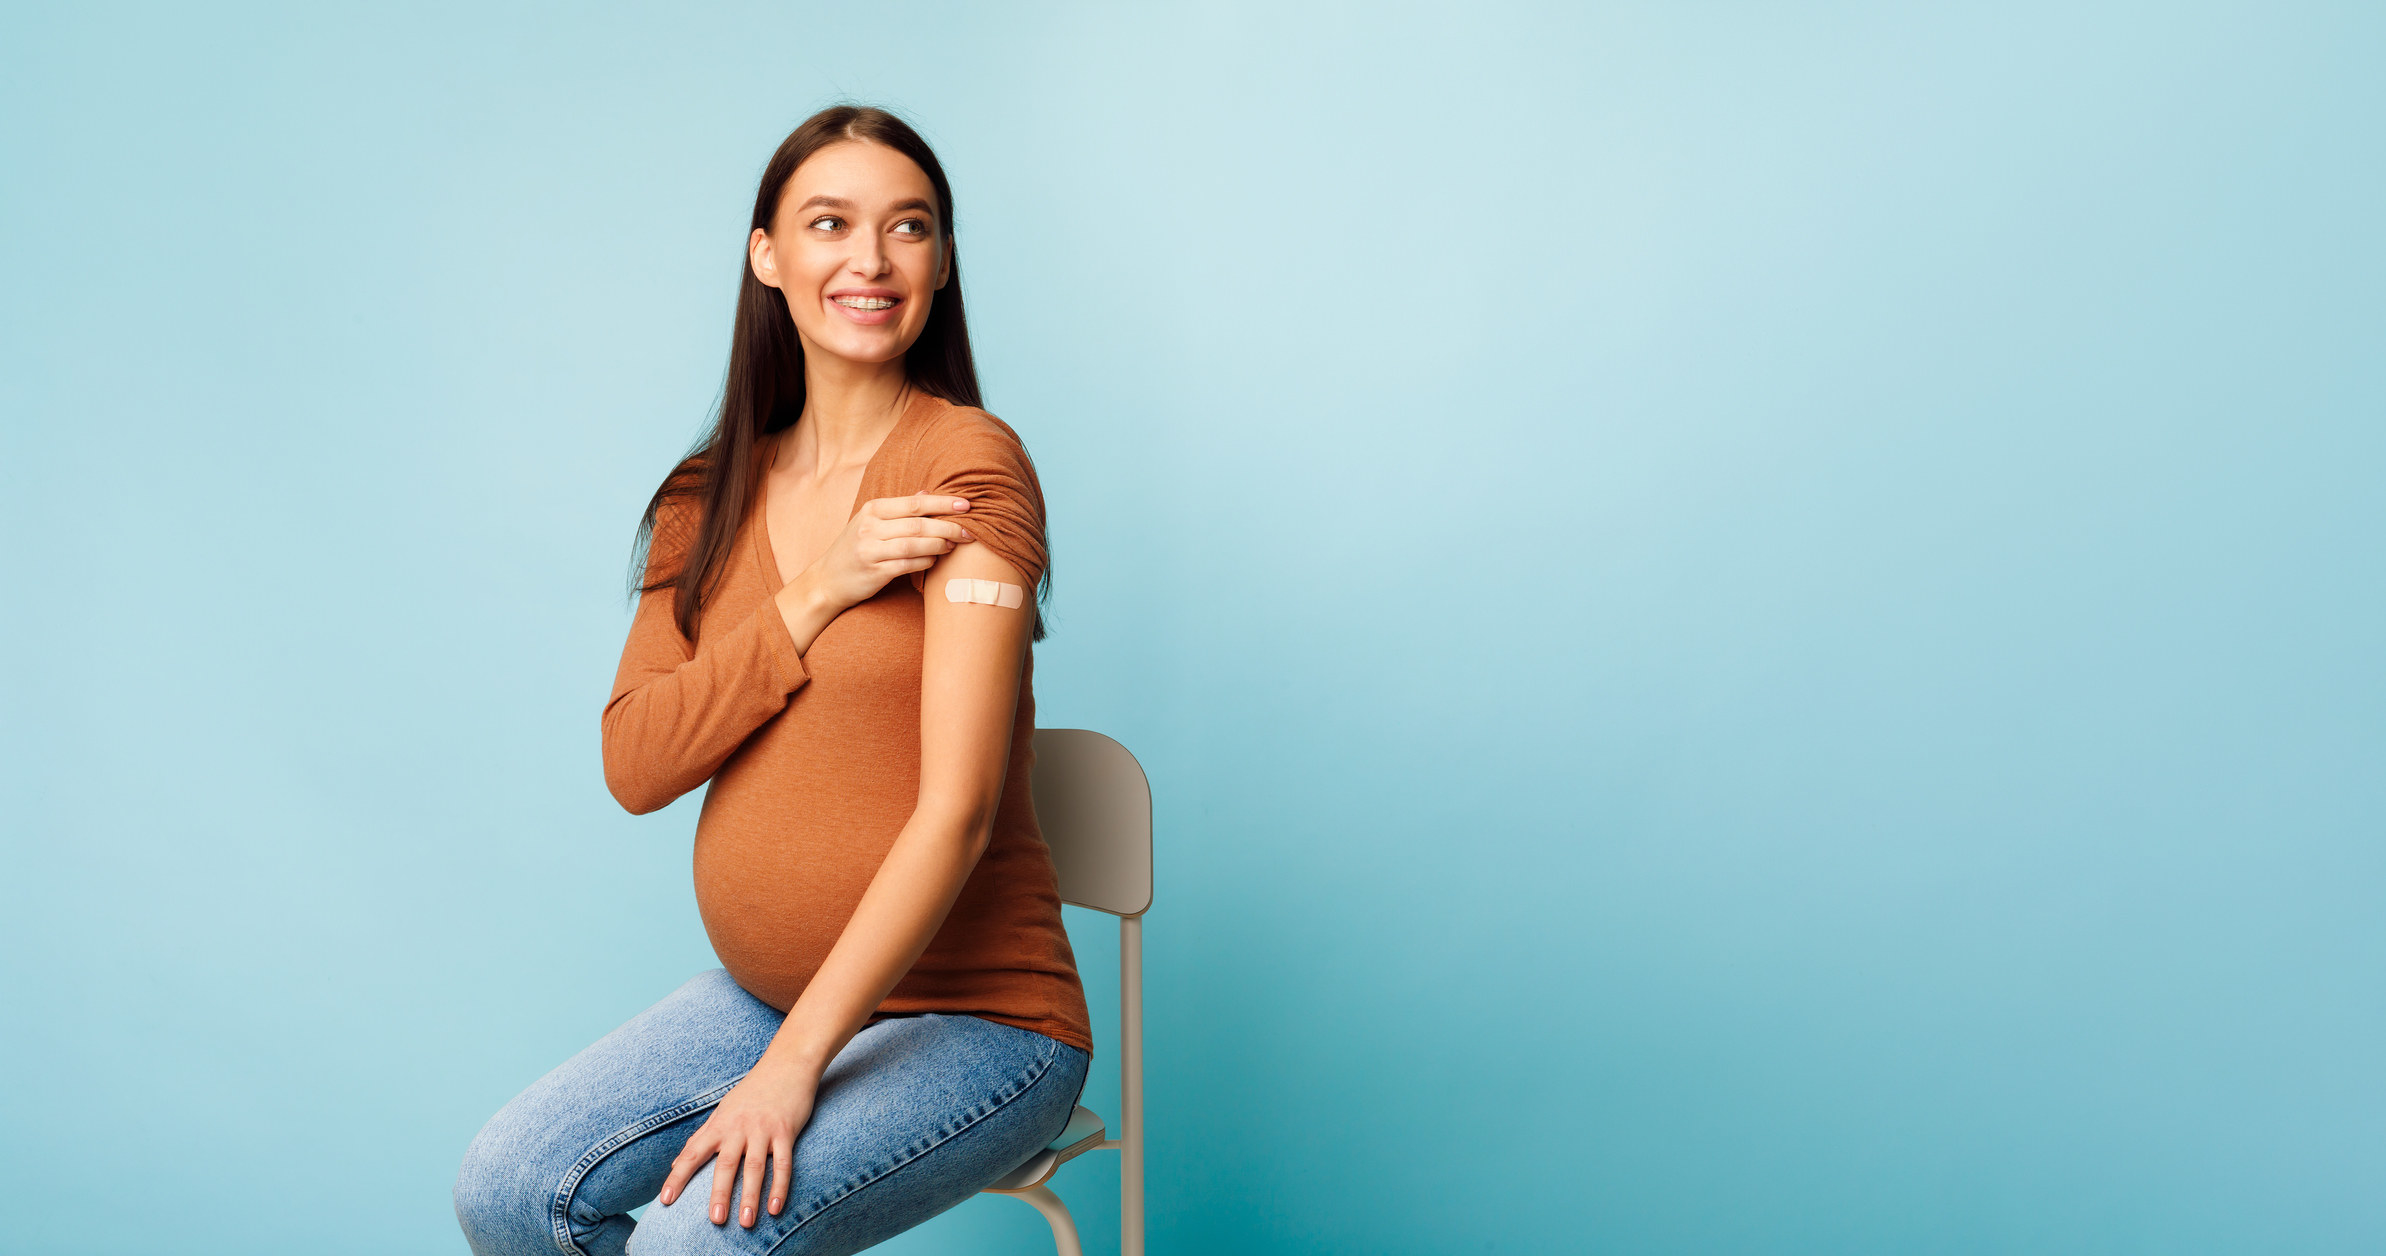 A pregnant woman sits on a chair. She is proudly displaying a plaster on the top of her arm where she has been vaccinated.